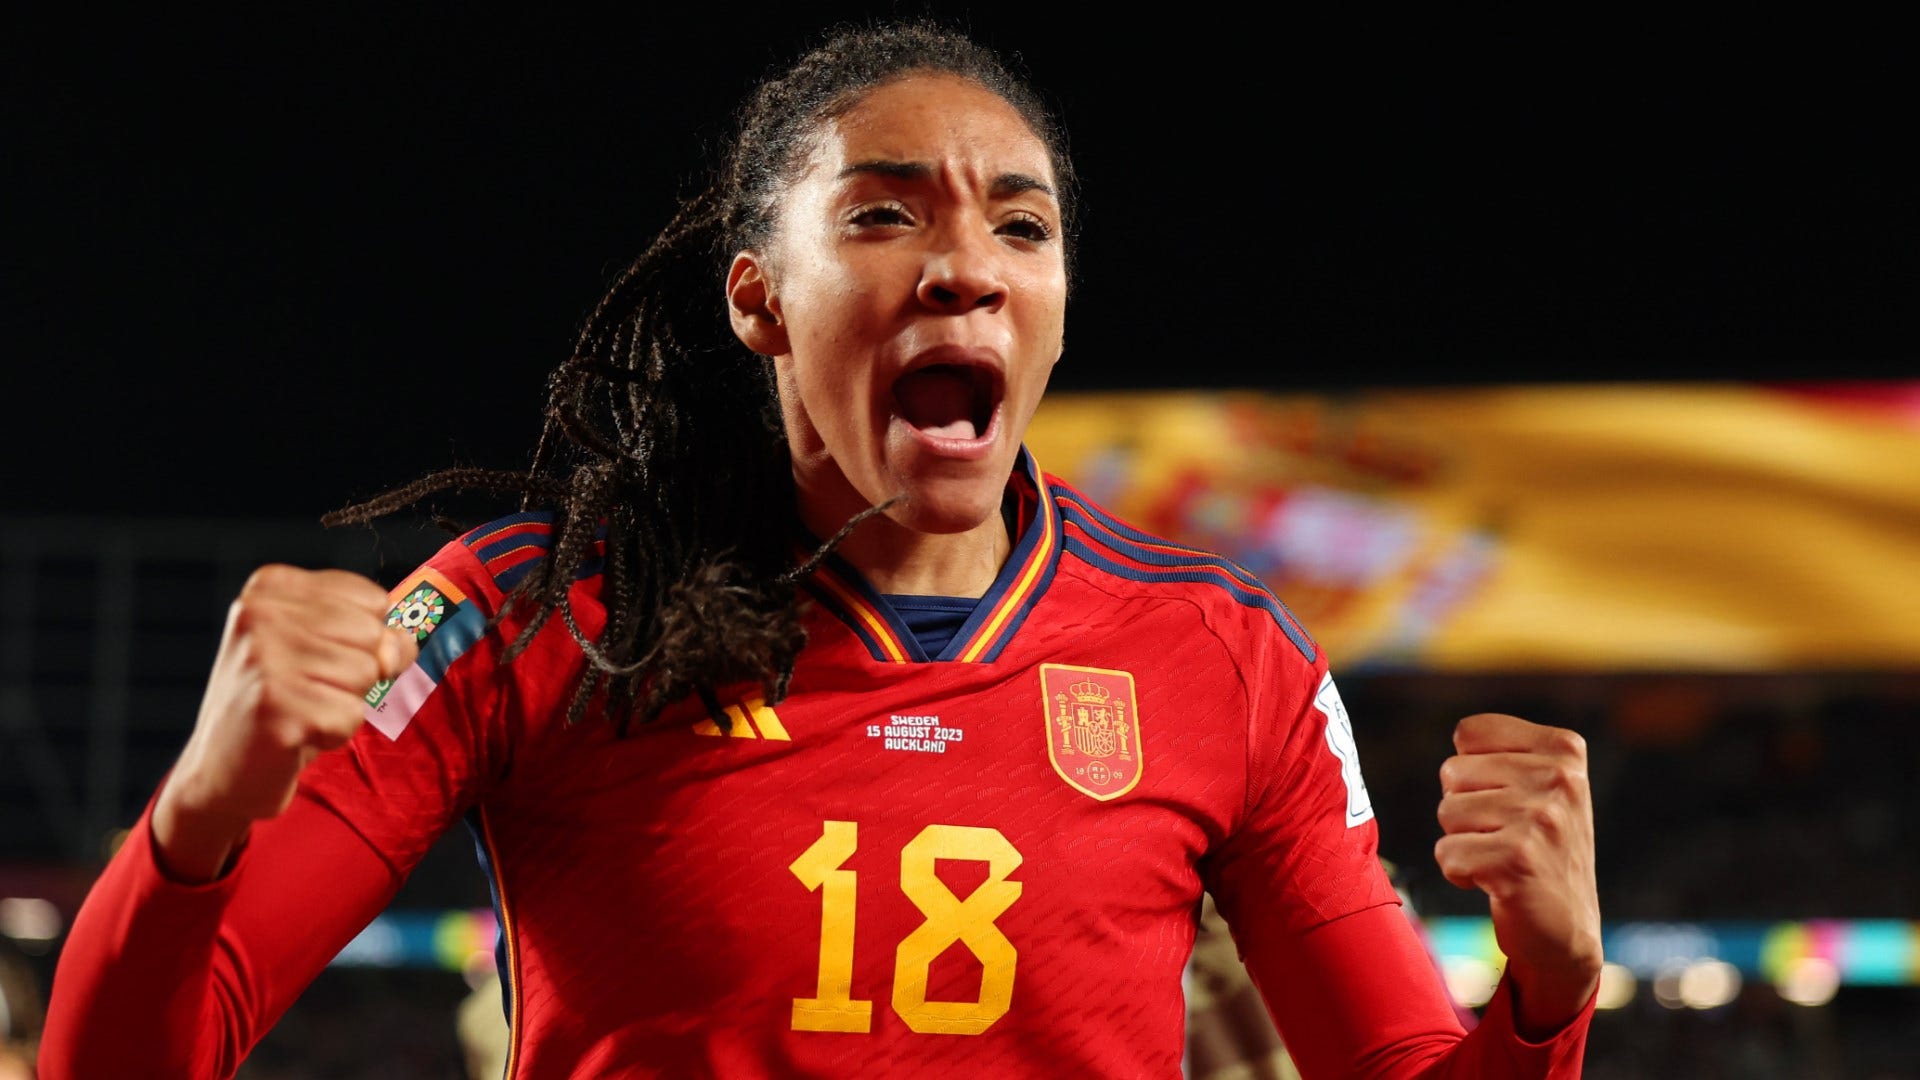 Salma Paralluelo Inspires Spain To First Reach Women's World Cup Final